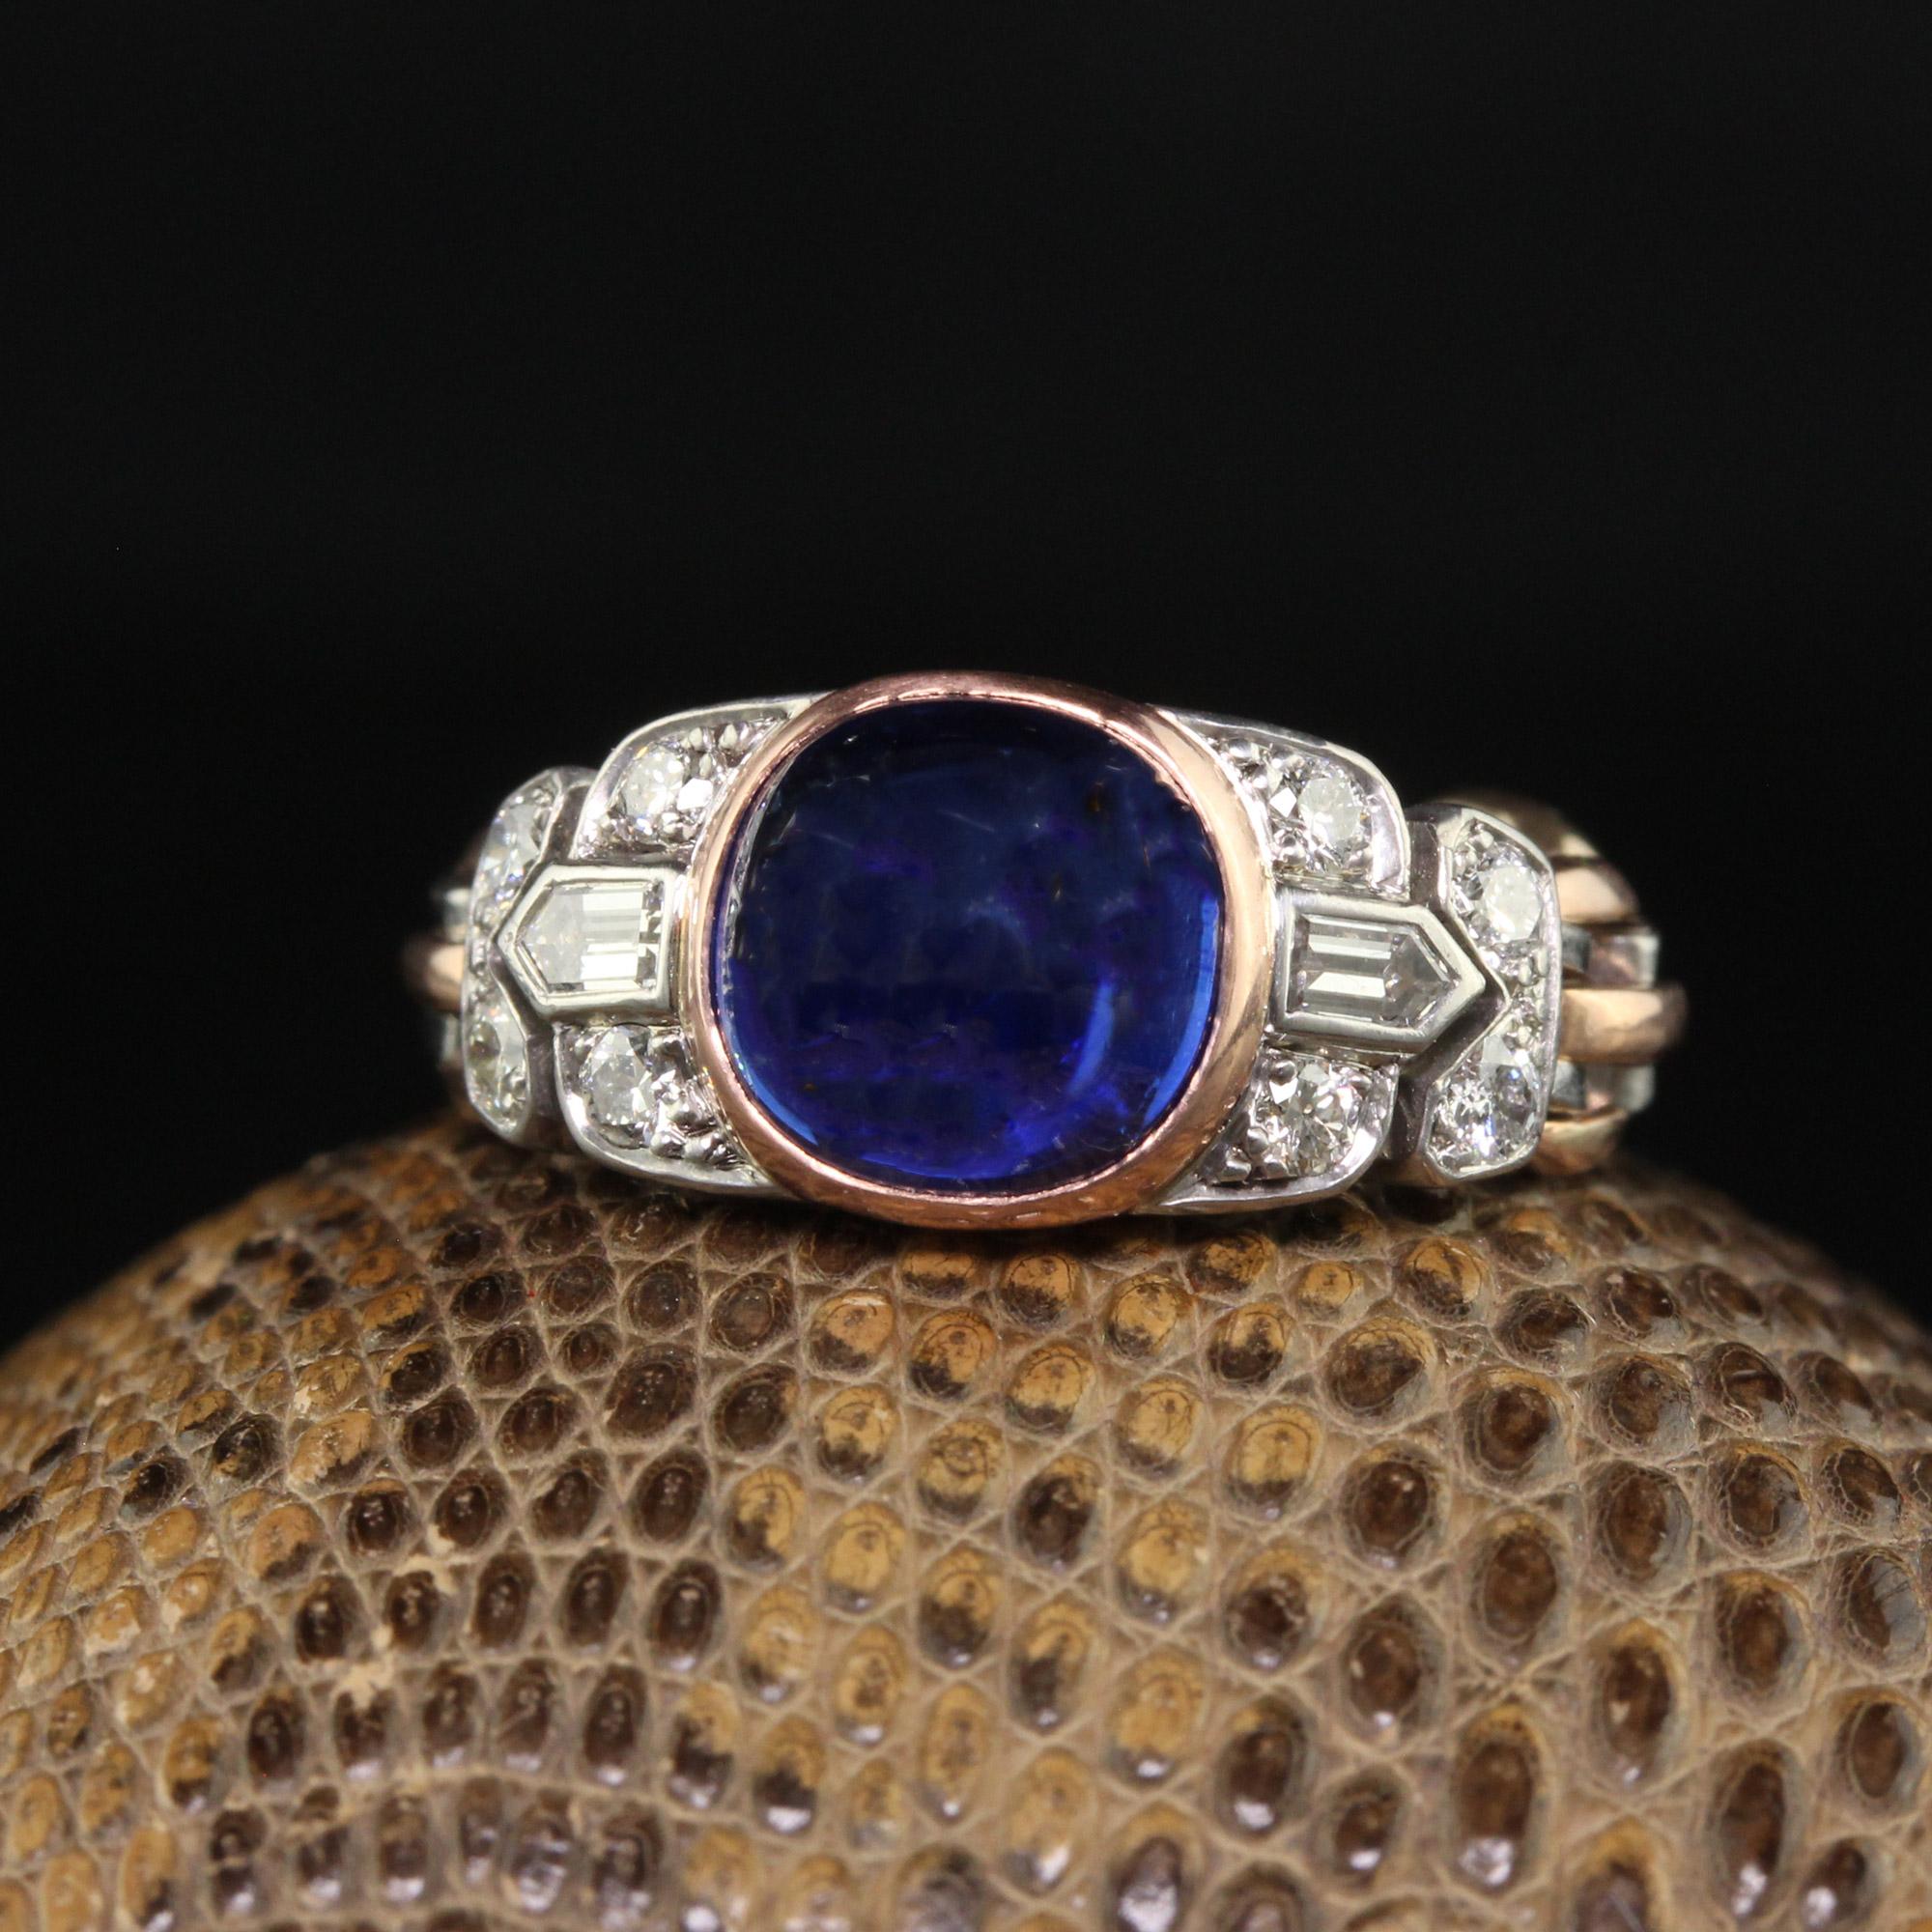 Beautiful Antique Art Deco 18K Gold Platinum Kashmir Sapphire Diamond Flexible Ring - AGL/SSEF/GIA. This magnificent Art Deco ring is crafted in 18k rose gold and platinum. This ring has a natural sugar loaf sapphire in the center that has three